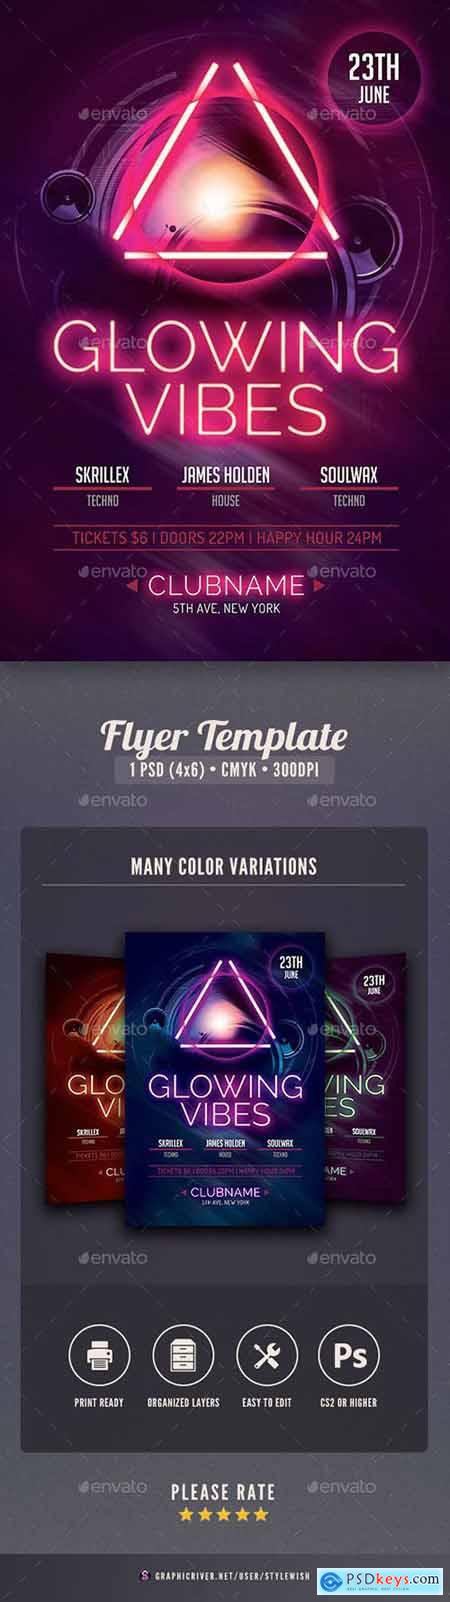 Graphicriver Glowing Vibes Flyer